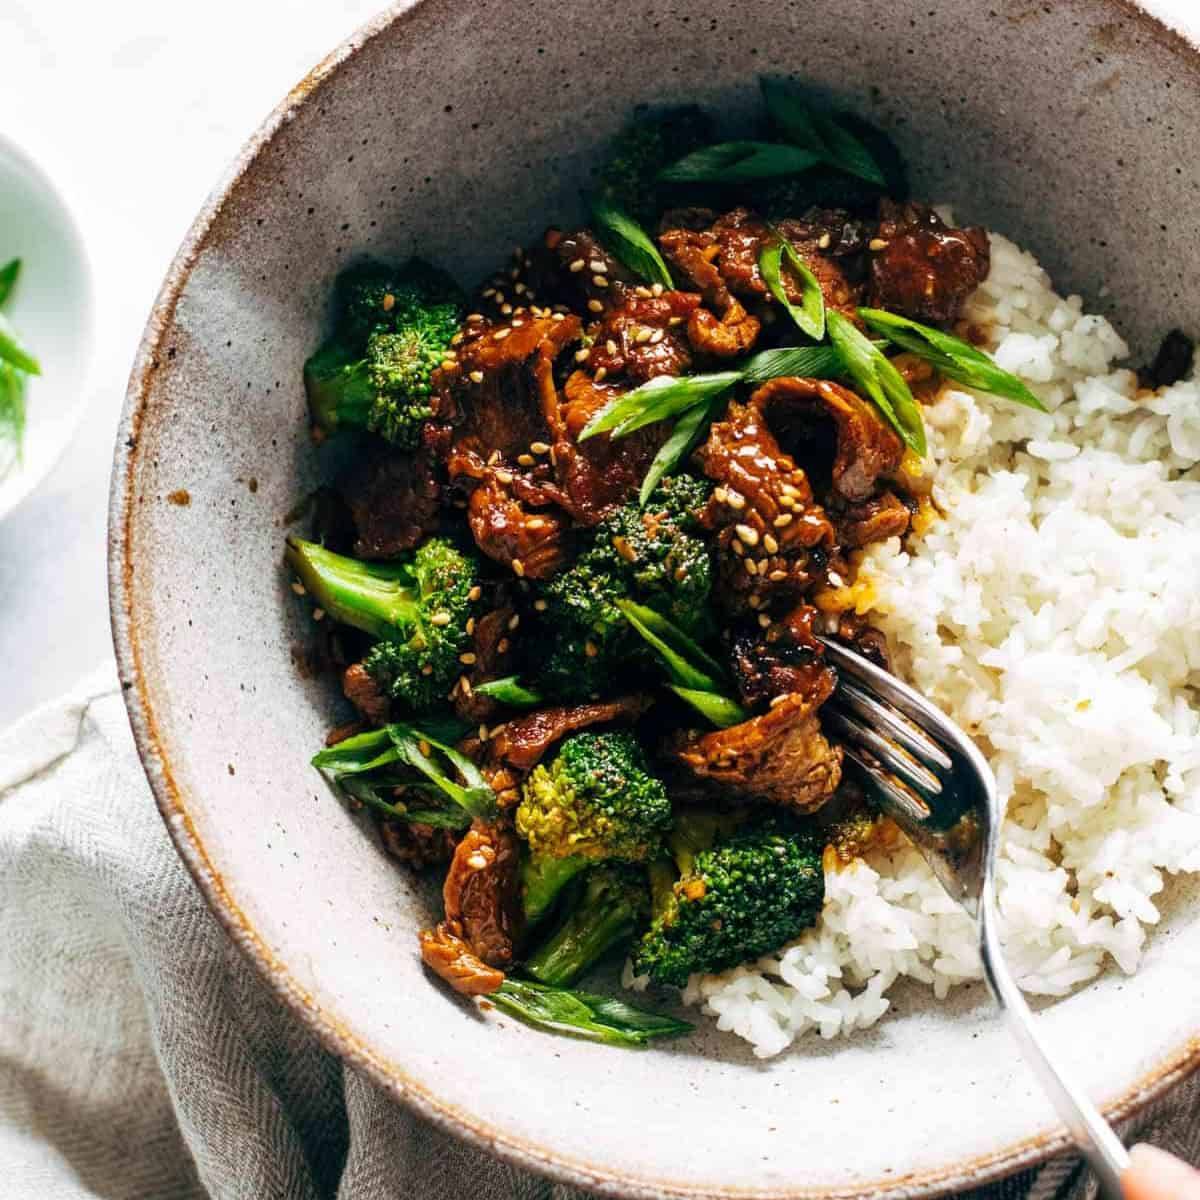 Hearty, saucy beef and broccoli with a side of white rice, and green onions in a rustic bowl.